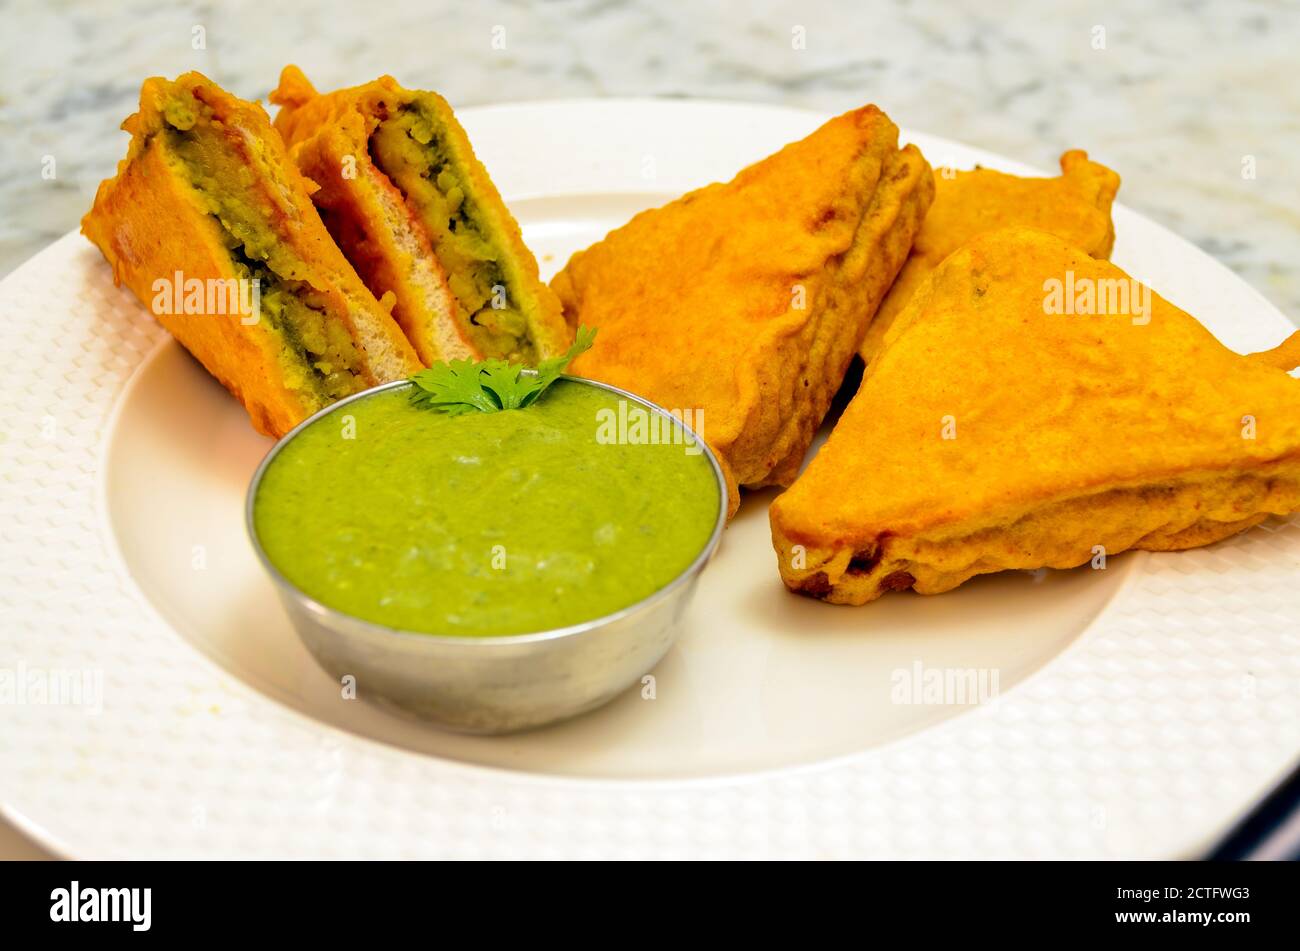 Delicious Bread Pakoda in a round white Plate along with Green Coriander Chutney Stock Photo